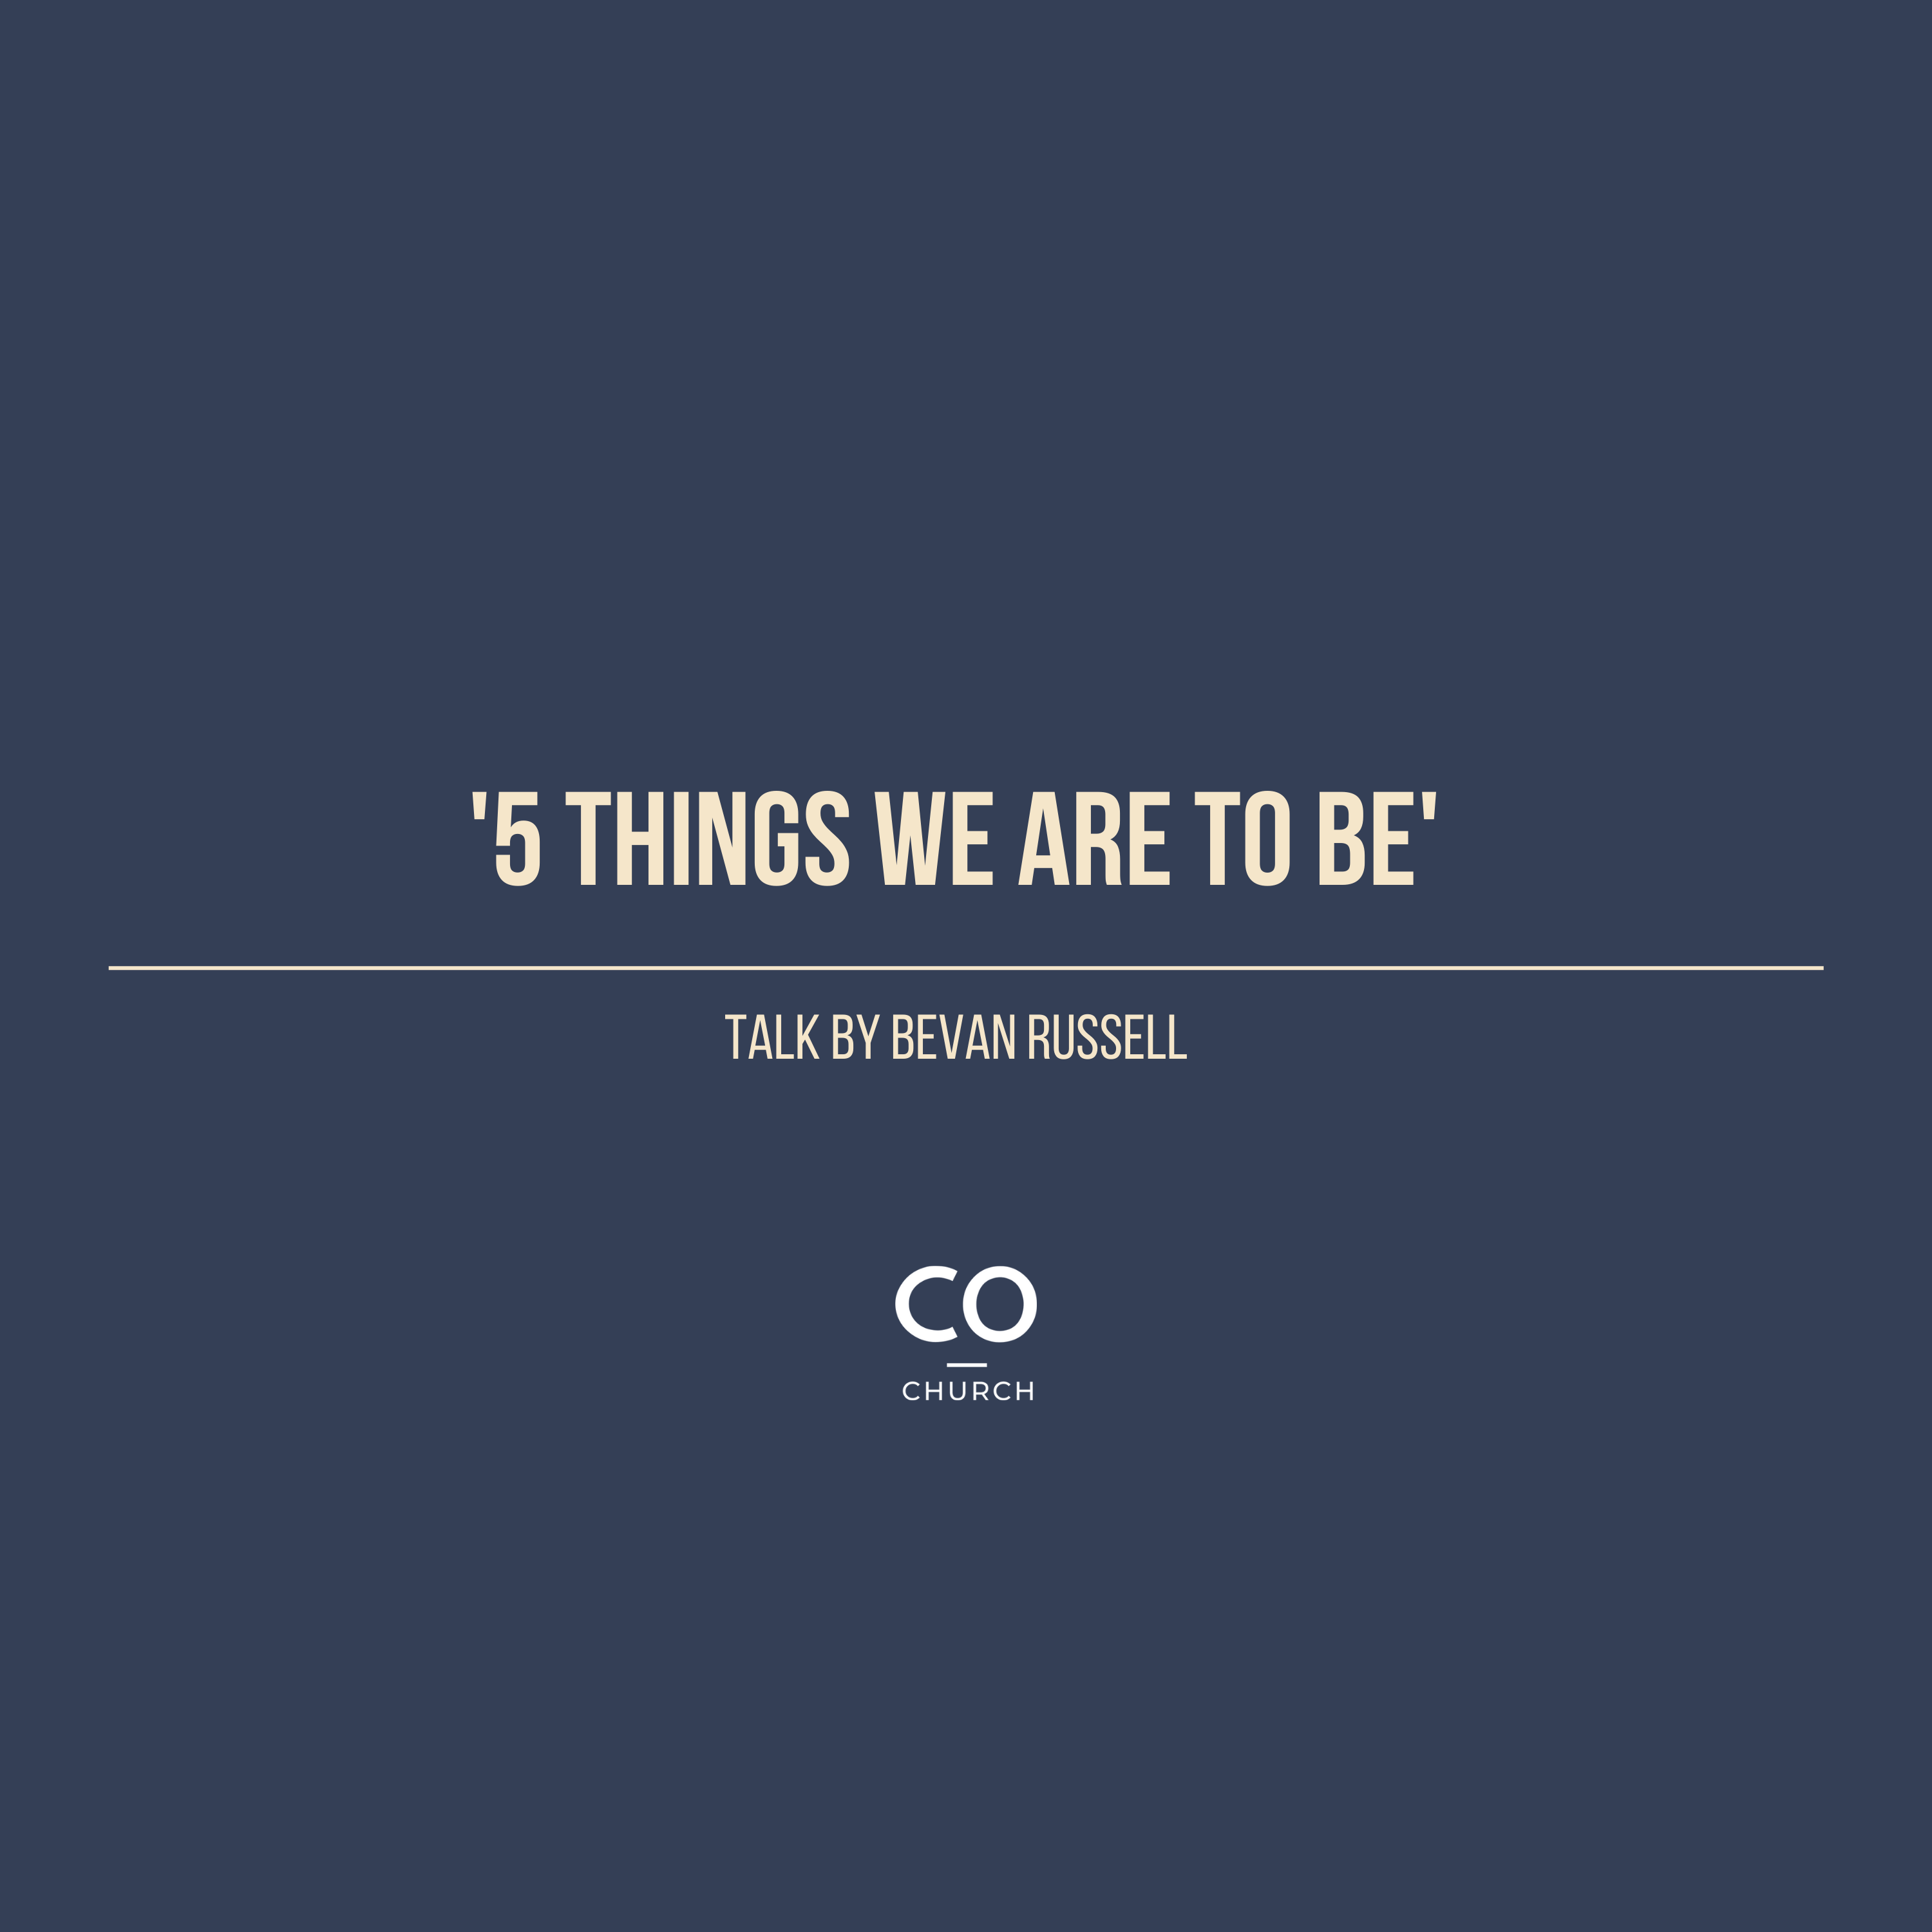 5 Things We Are To Be - Lessons from 1 Peter by Bevan Russell.